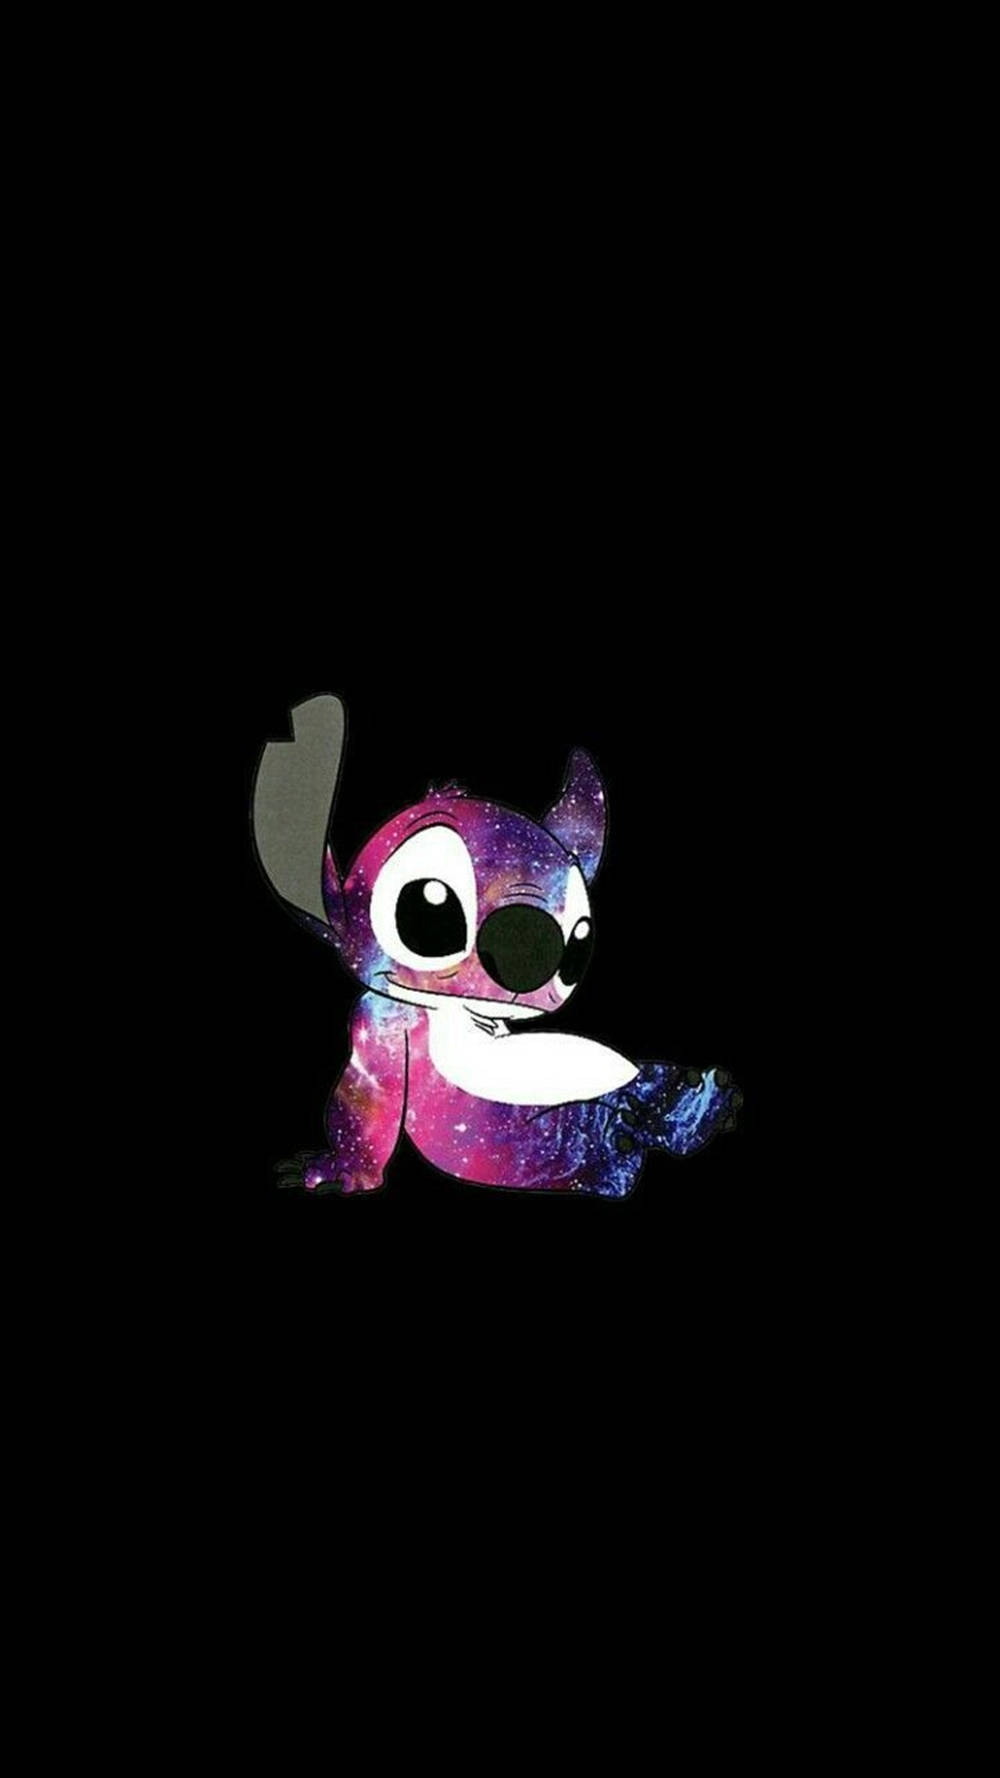 Cute Stitch Shimmering Galaxy IPhone Wallpaper